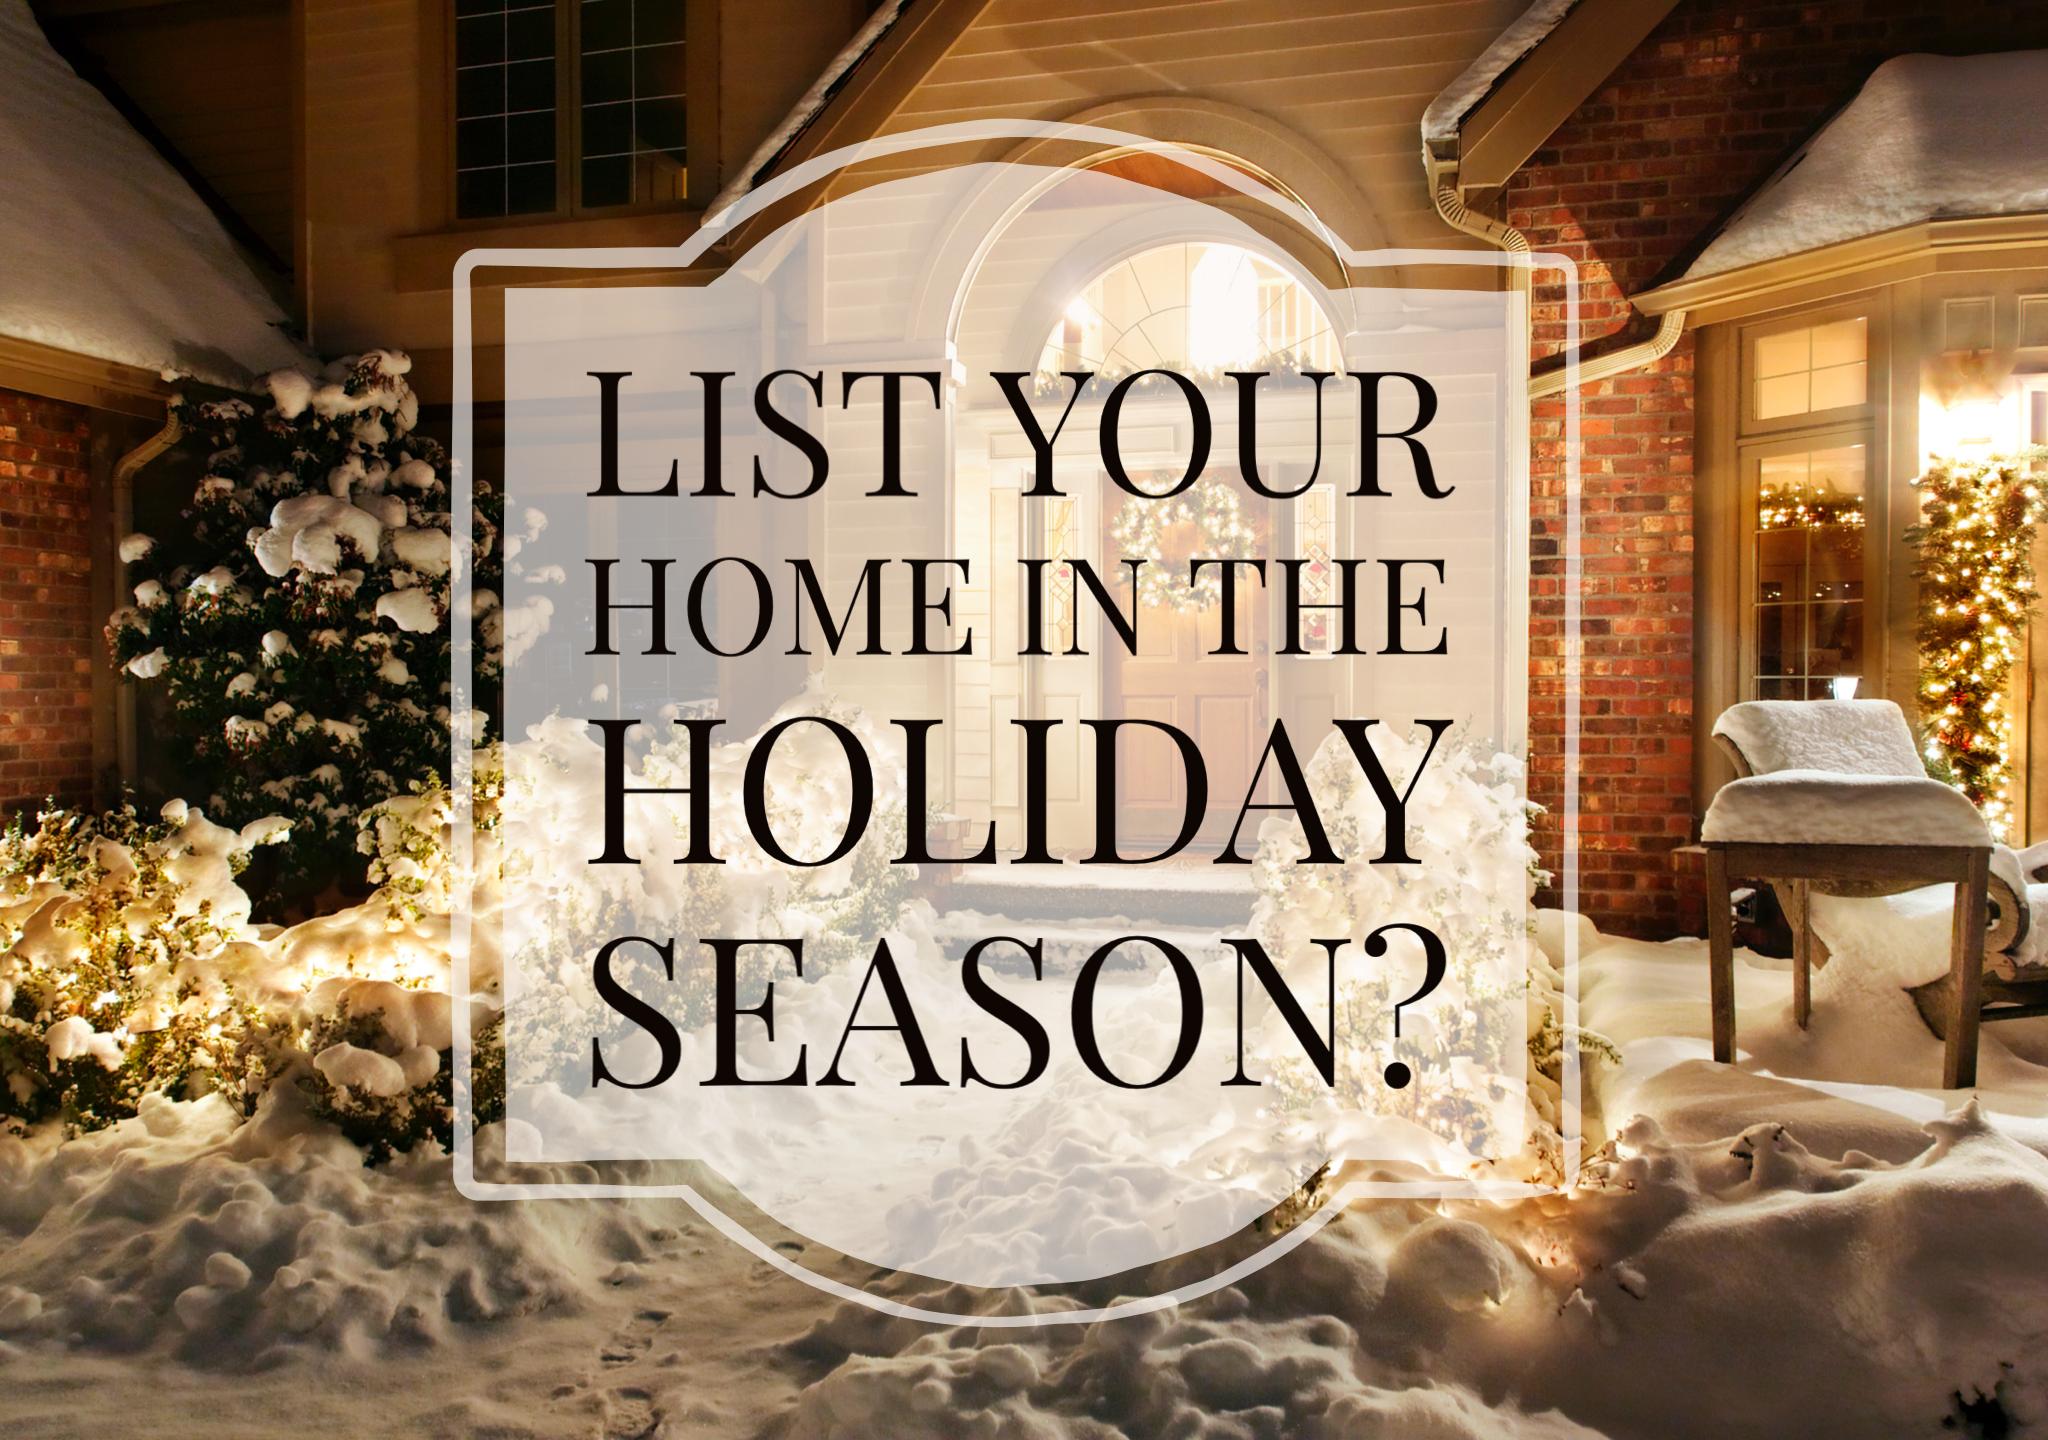 List Your Home in the Holiday Season?